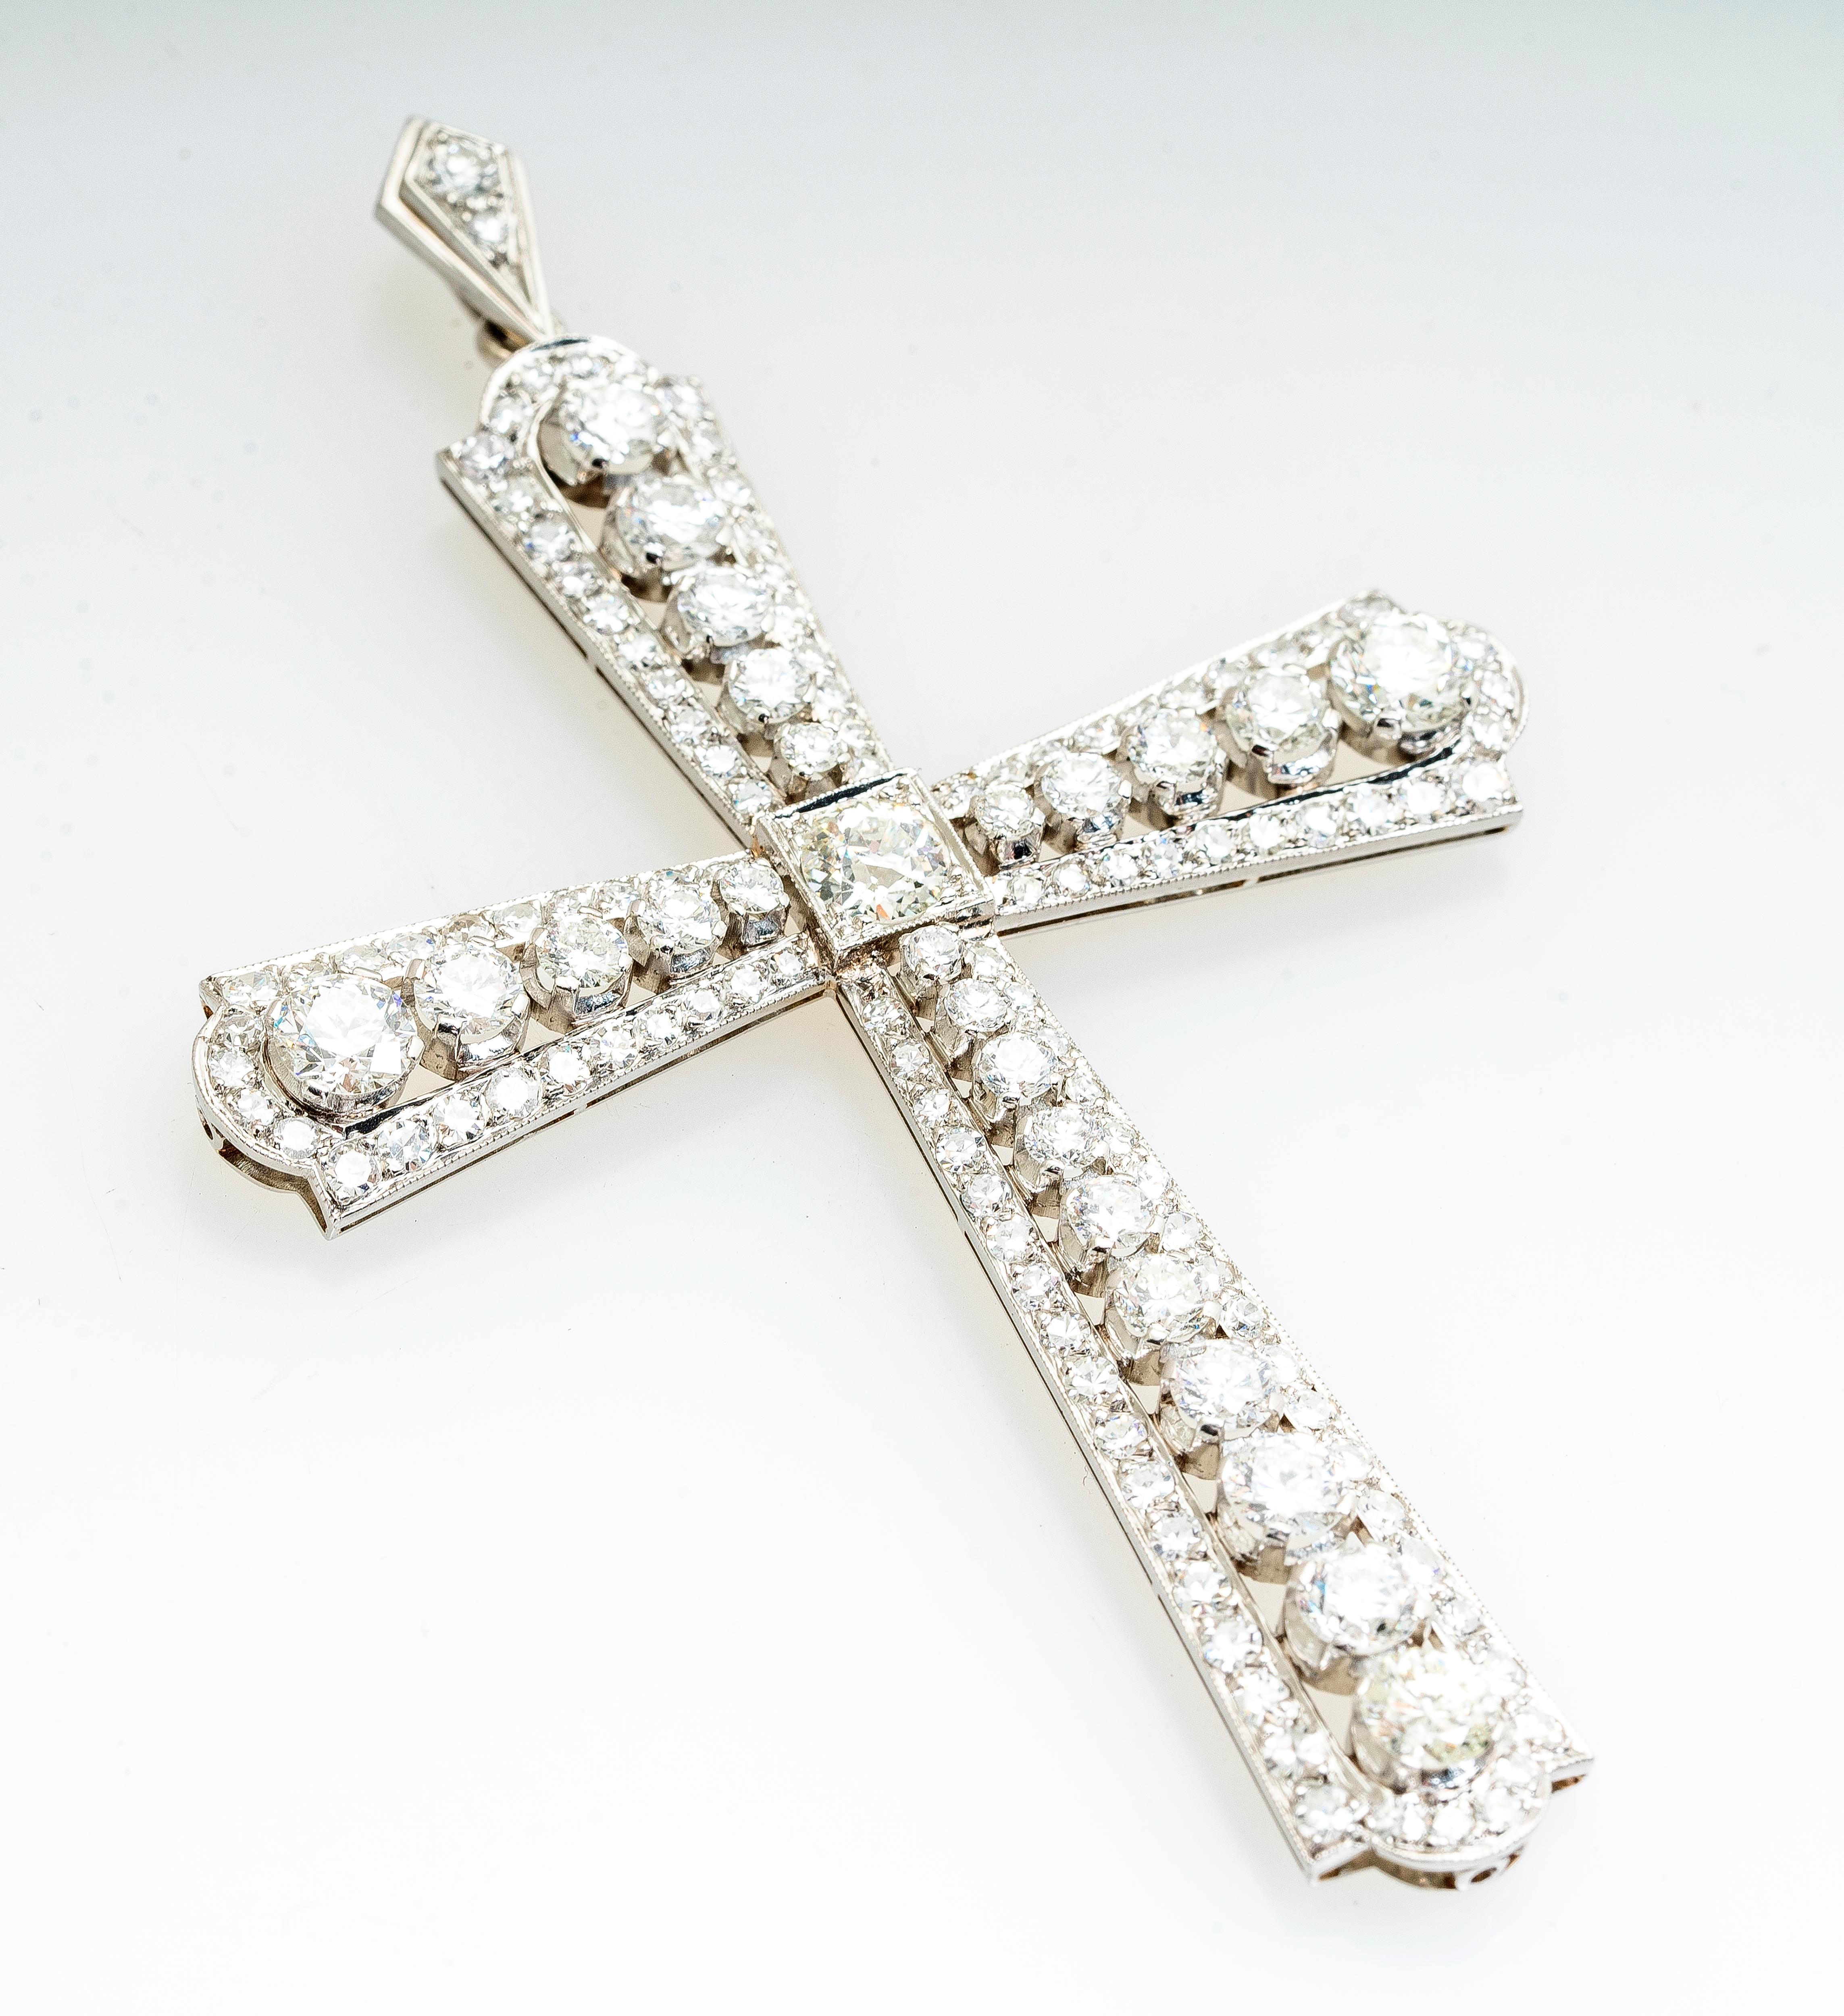 Antique platinum diamond large cross pendant.  Cross features an array of old European cut, transition cut and single cut diamonds weighing approximately 6.00 carat total weight.  Diamonds are J-K color and SI1-SI2 clarity.  Milgrain detailing all